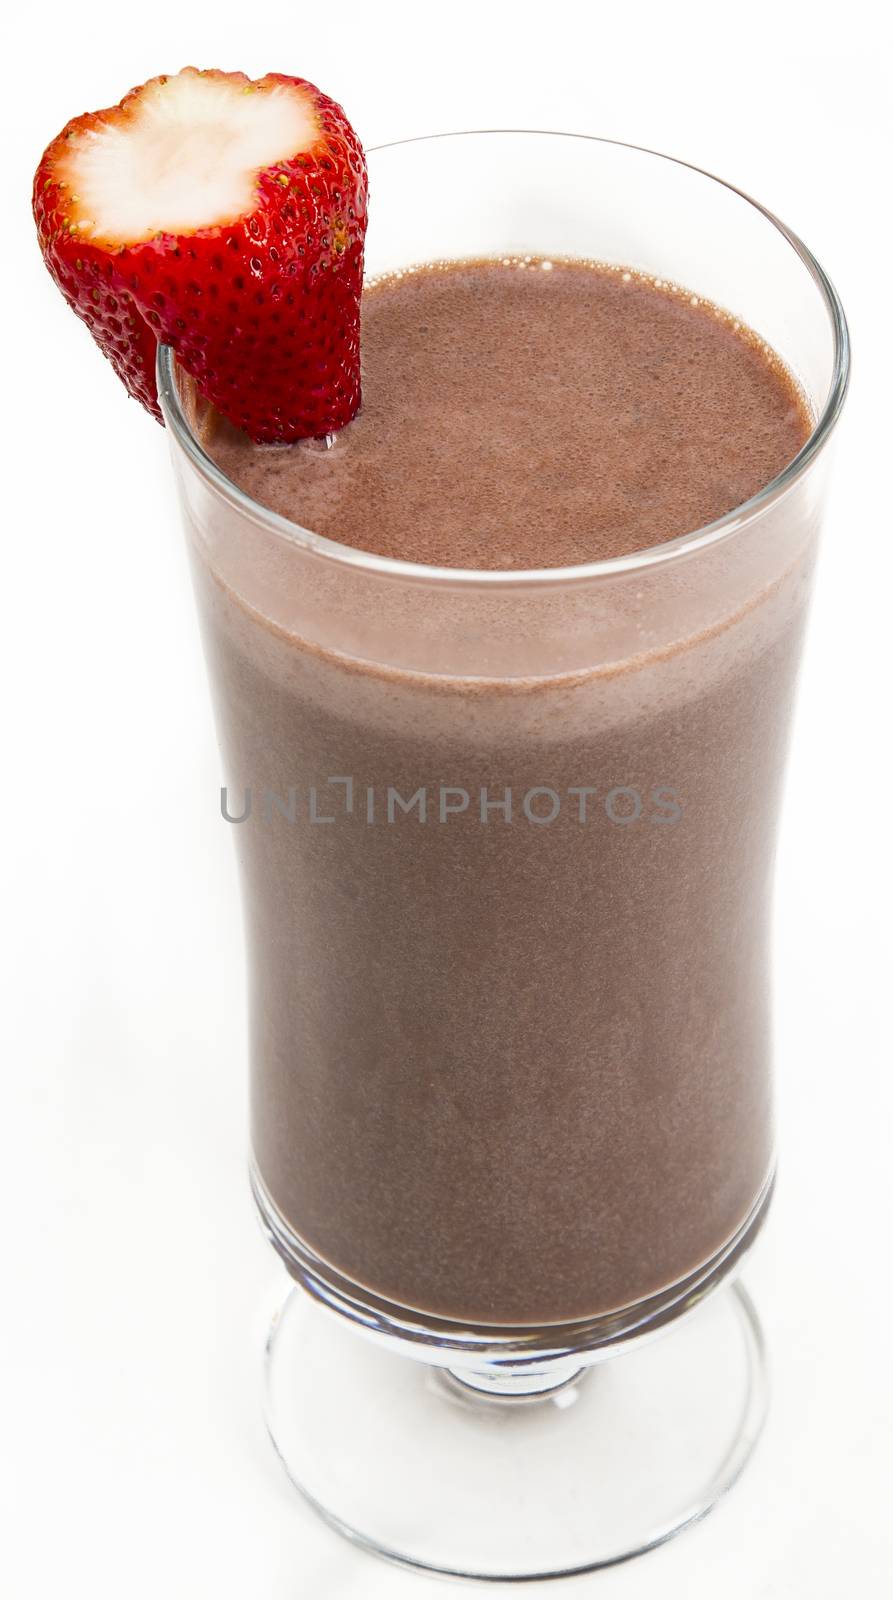 Chocolate milkshake with a strawberry on the side against a white background